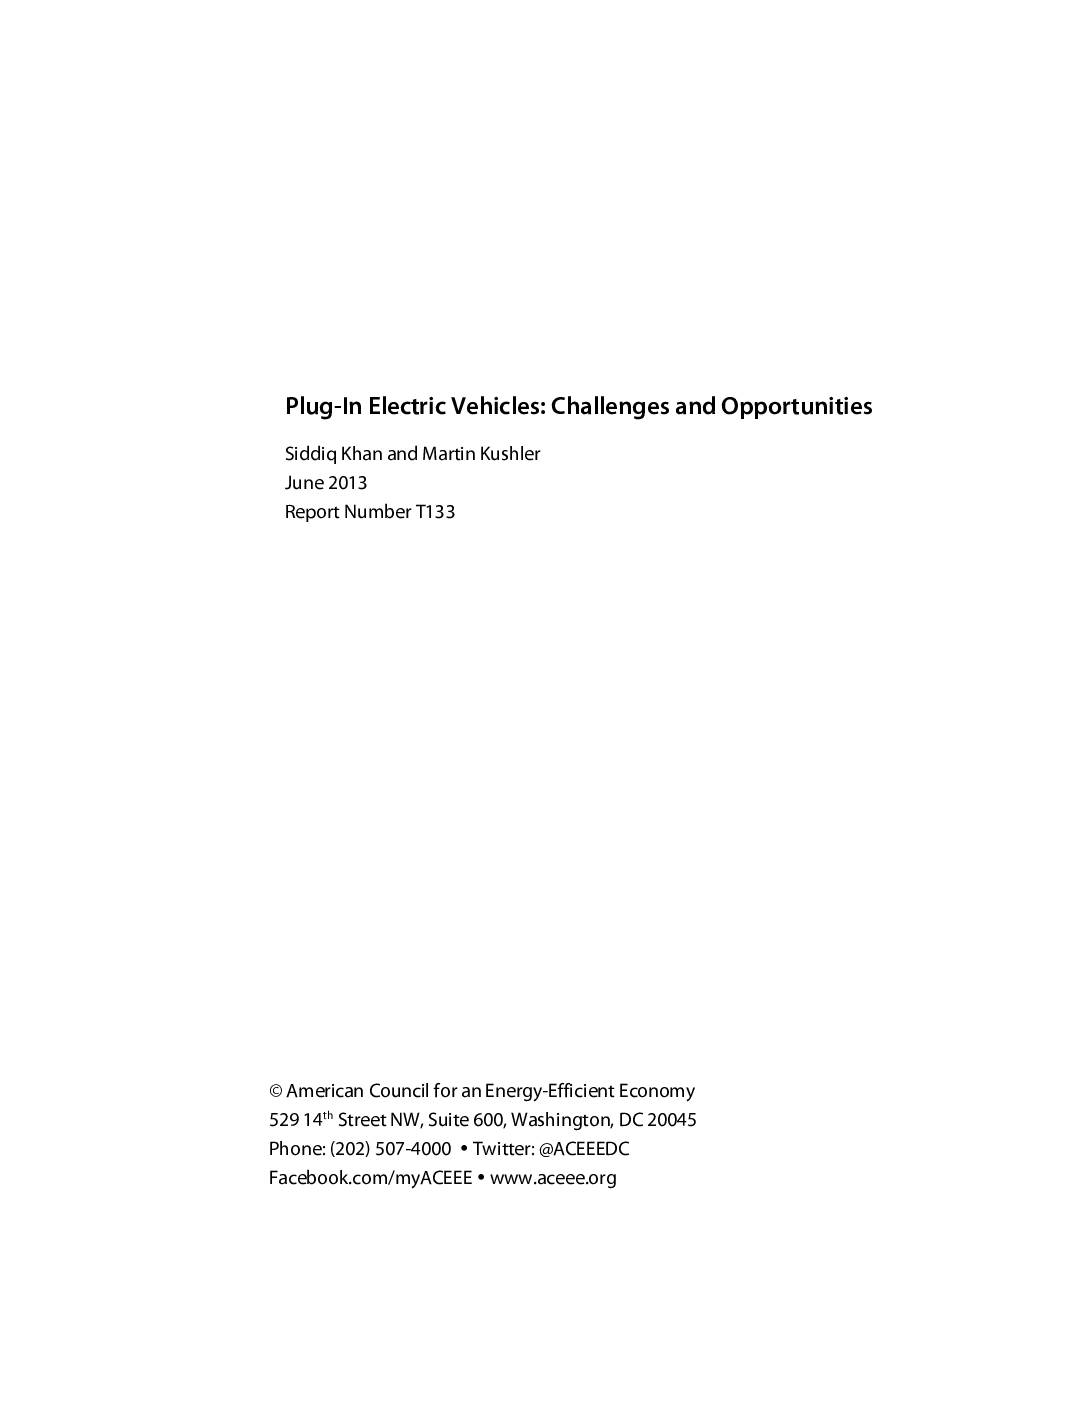 Plug-in Electric Vehicles: Challenges and Opportunities